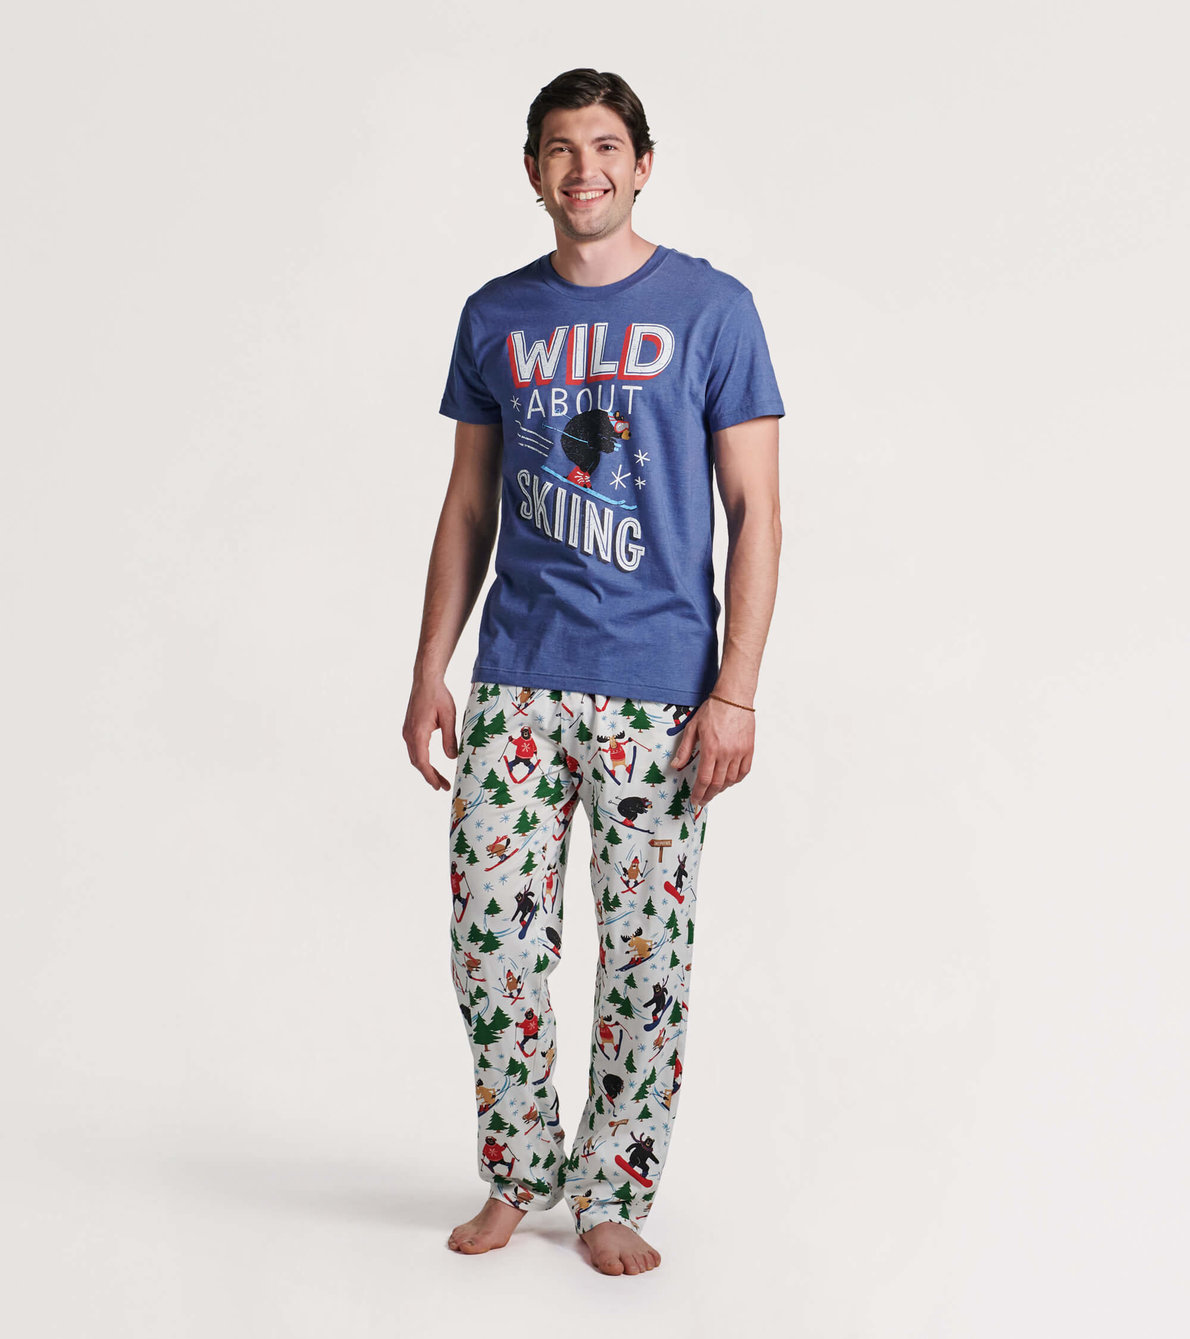 View larger image of Wild About Skiing Men's Tee